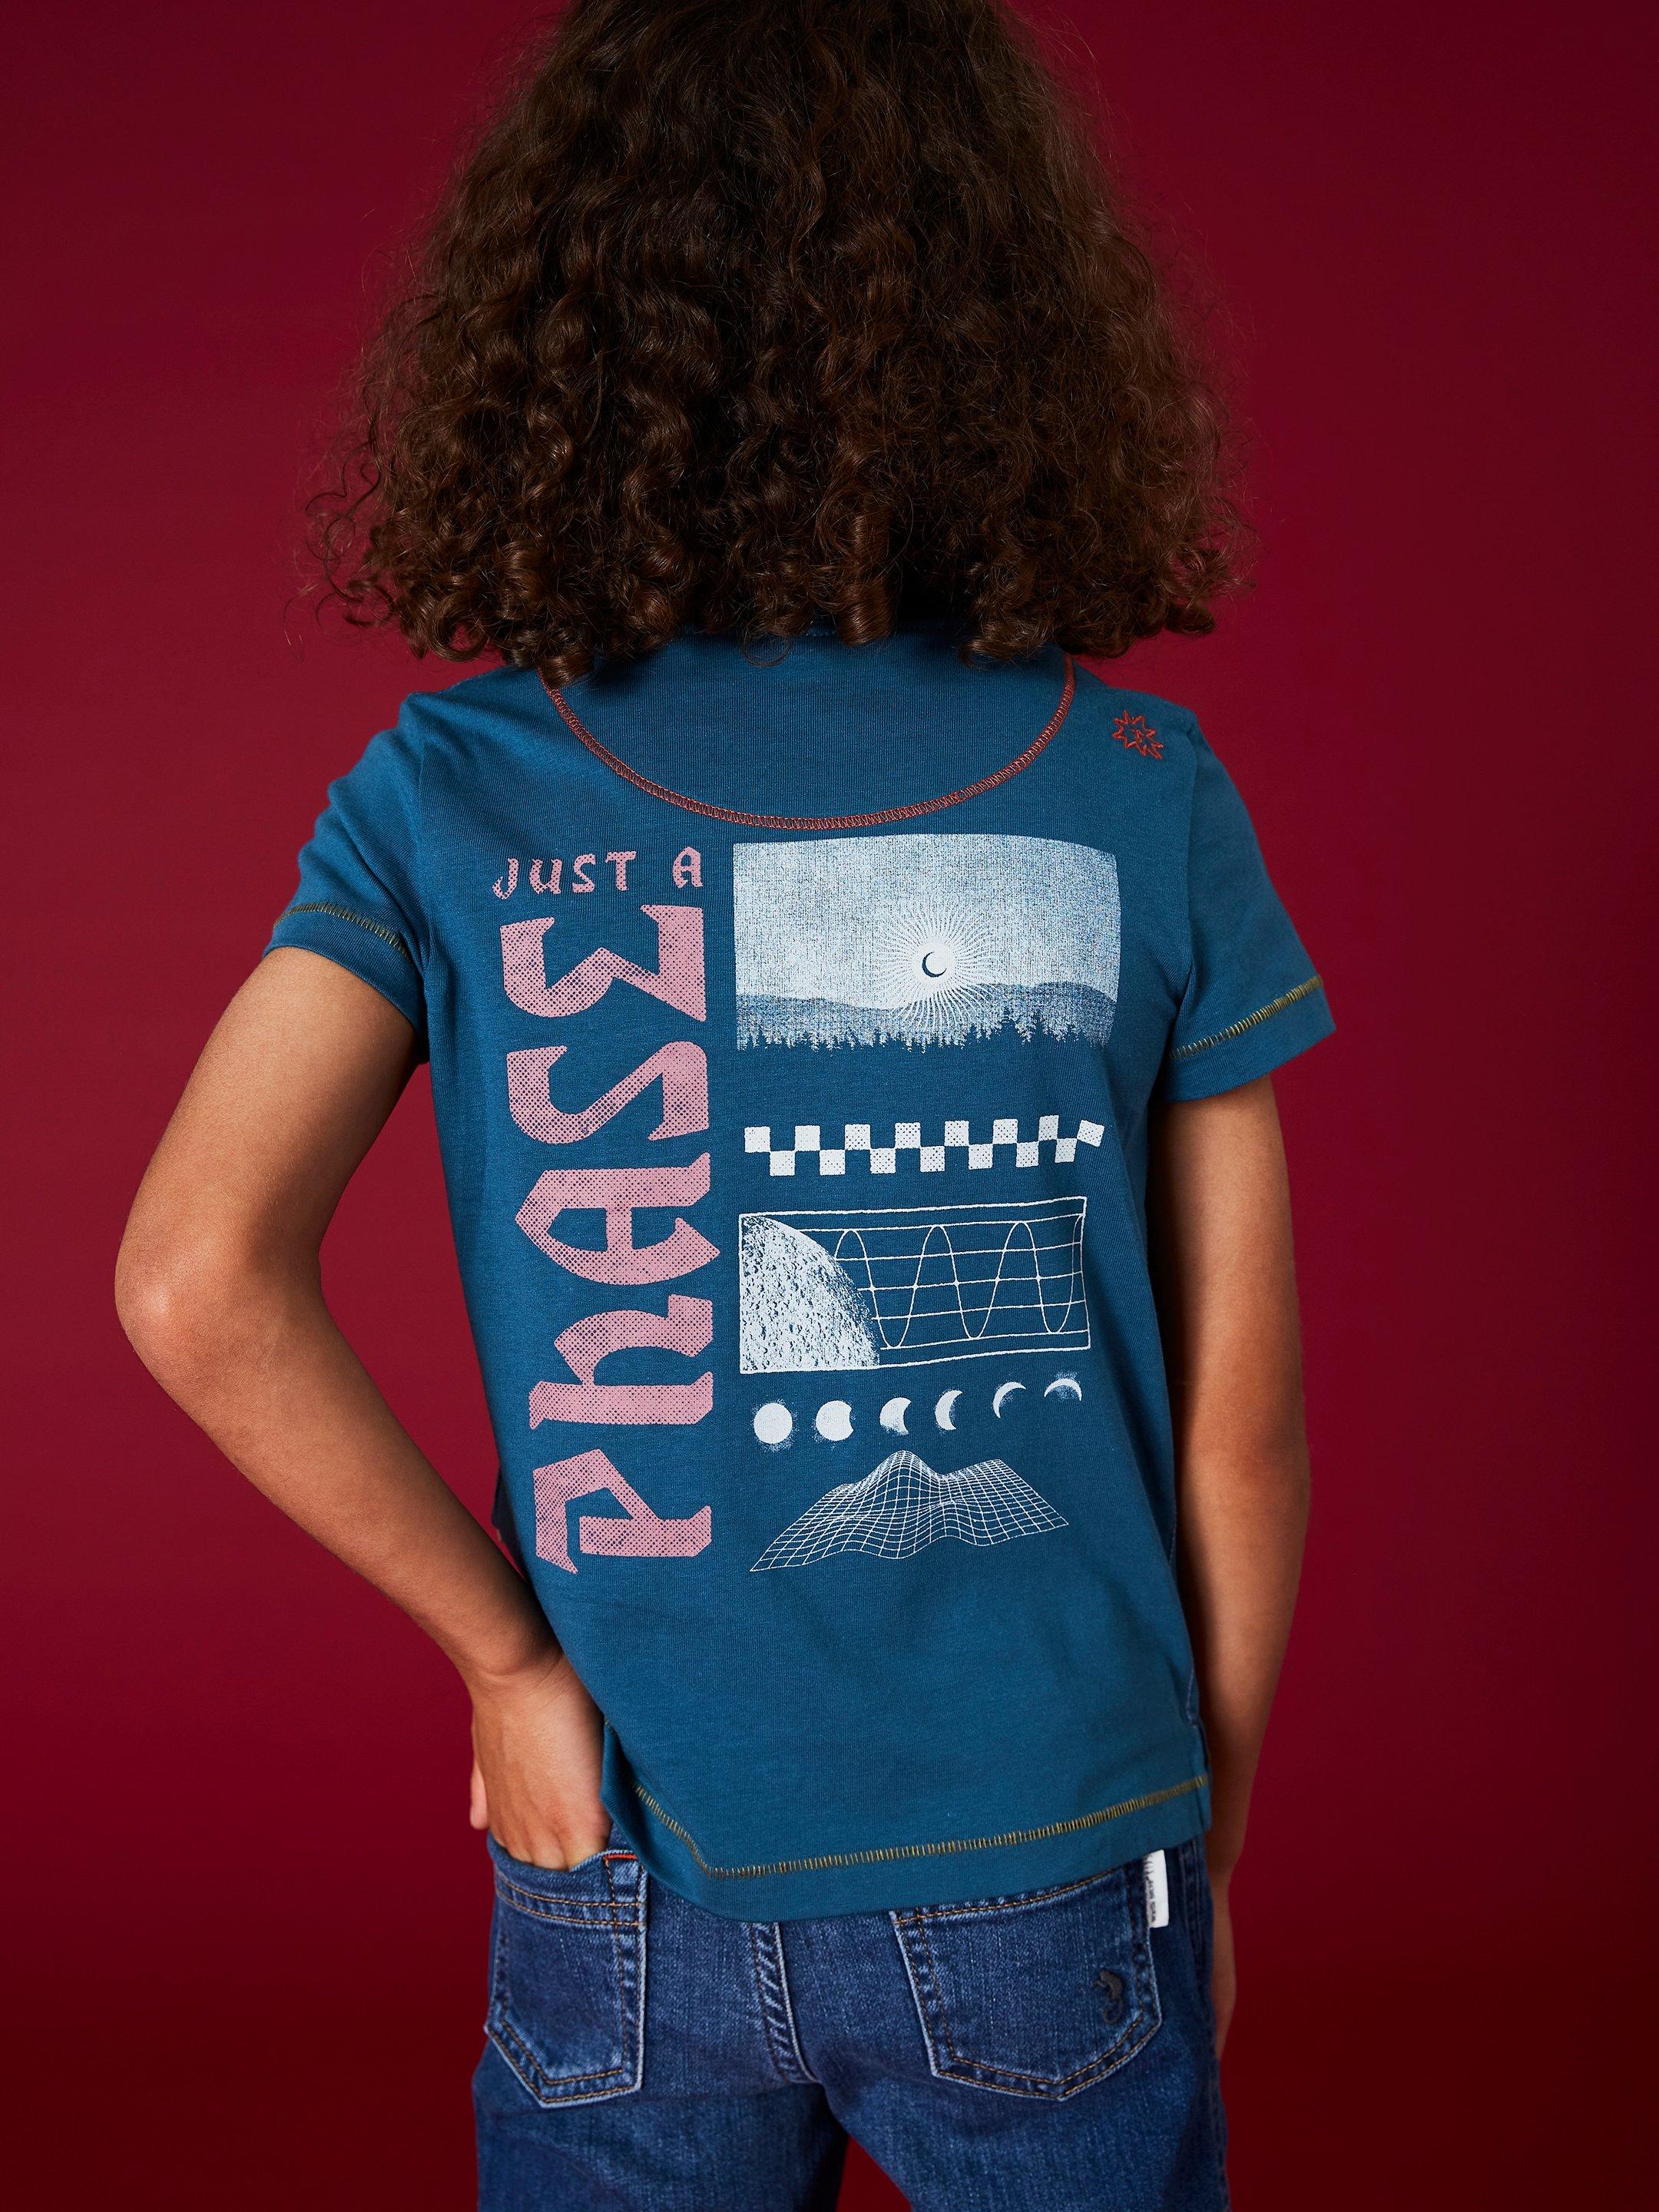 Alex Short Sleeve Graphic Tee in MID TEAL - MODEL BACK